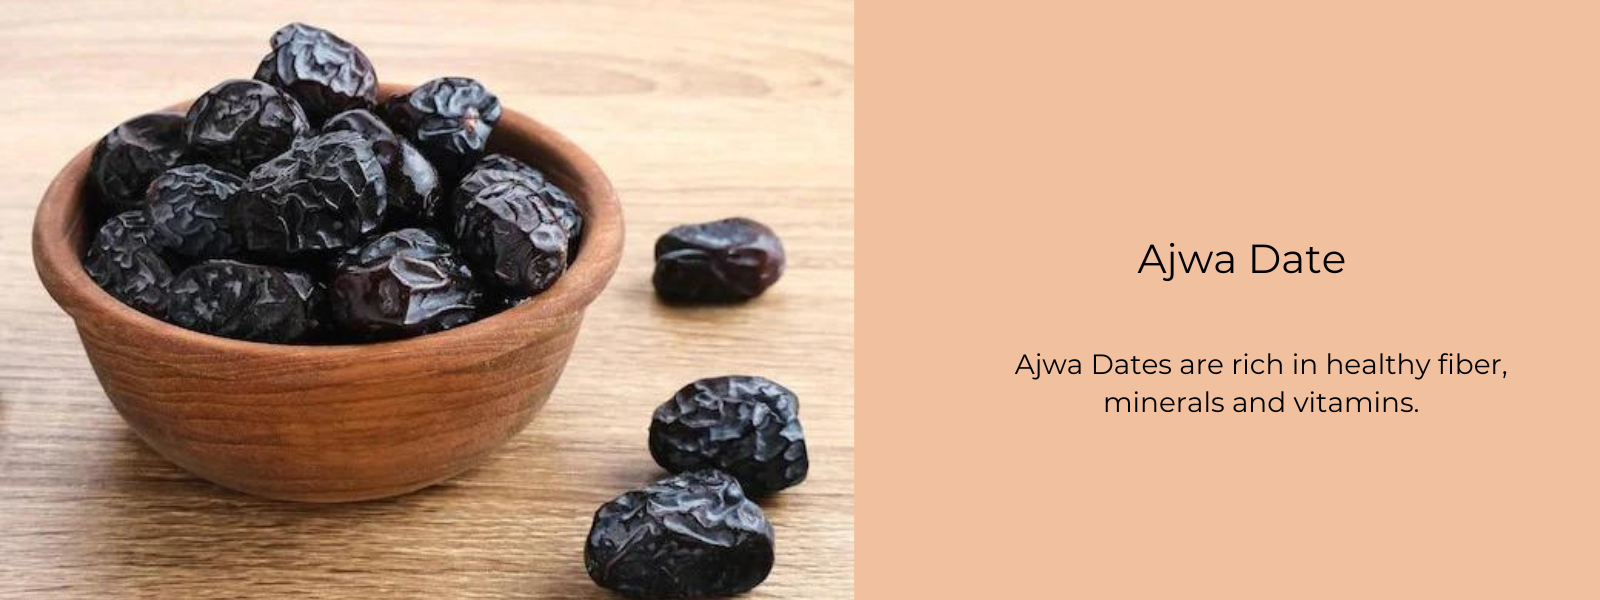 Ajwa Date - Health Benefits, Uses and Important Facts